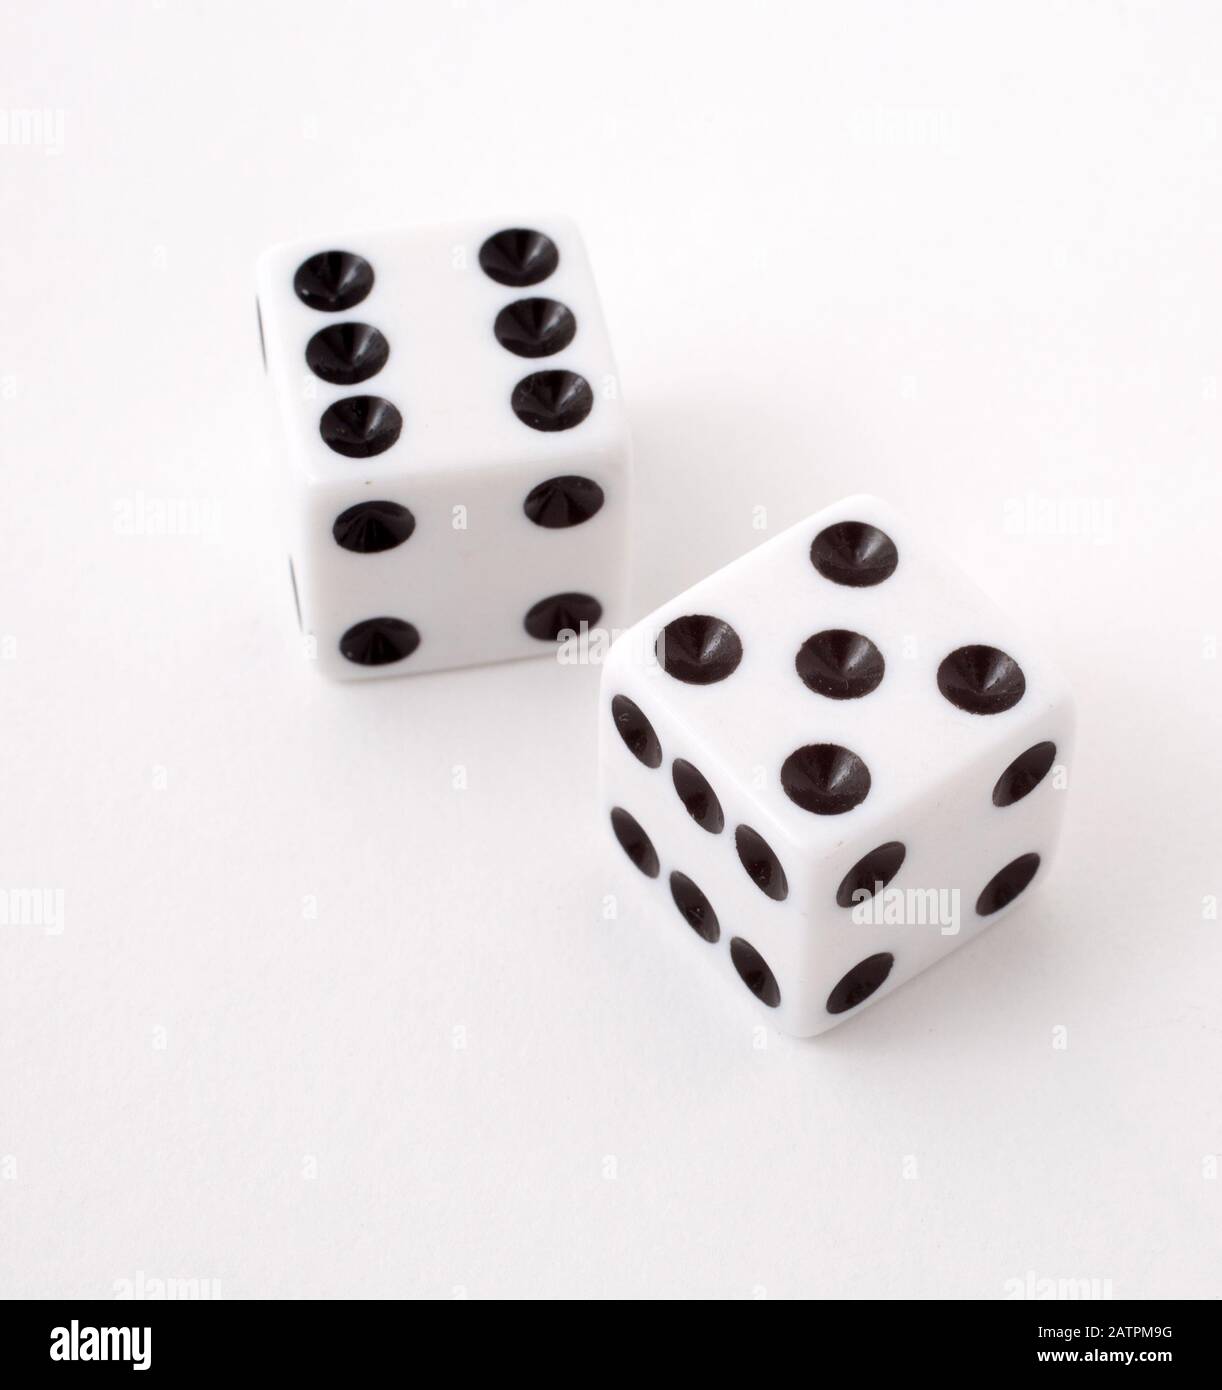 Two dice rolling 11, shot against a white background Stock Photo